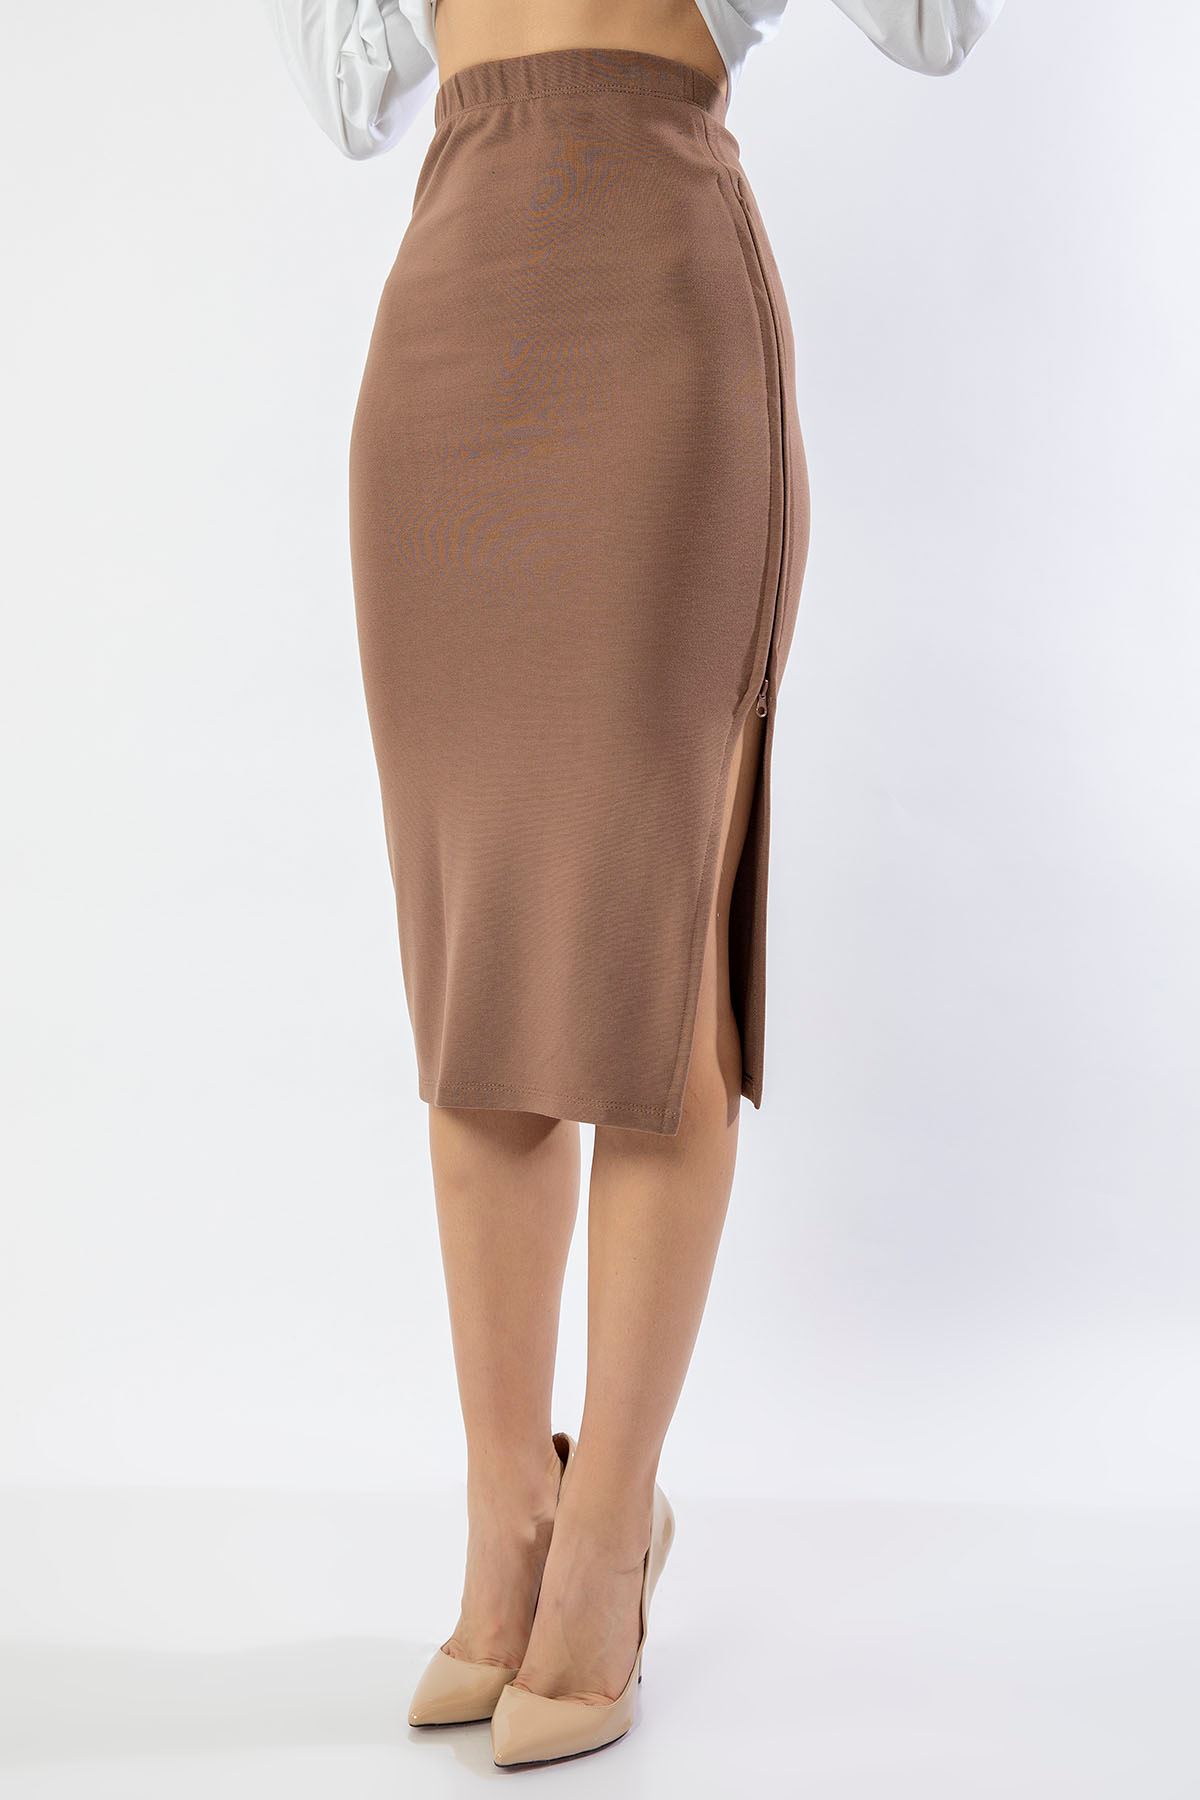 Knit Fabric 3/4 Short Tight Fit Slit Skirt - Brown